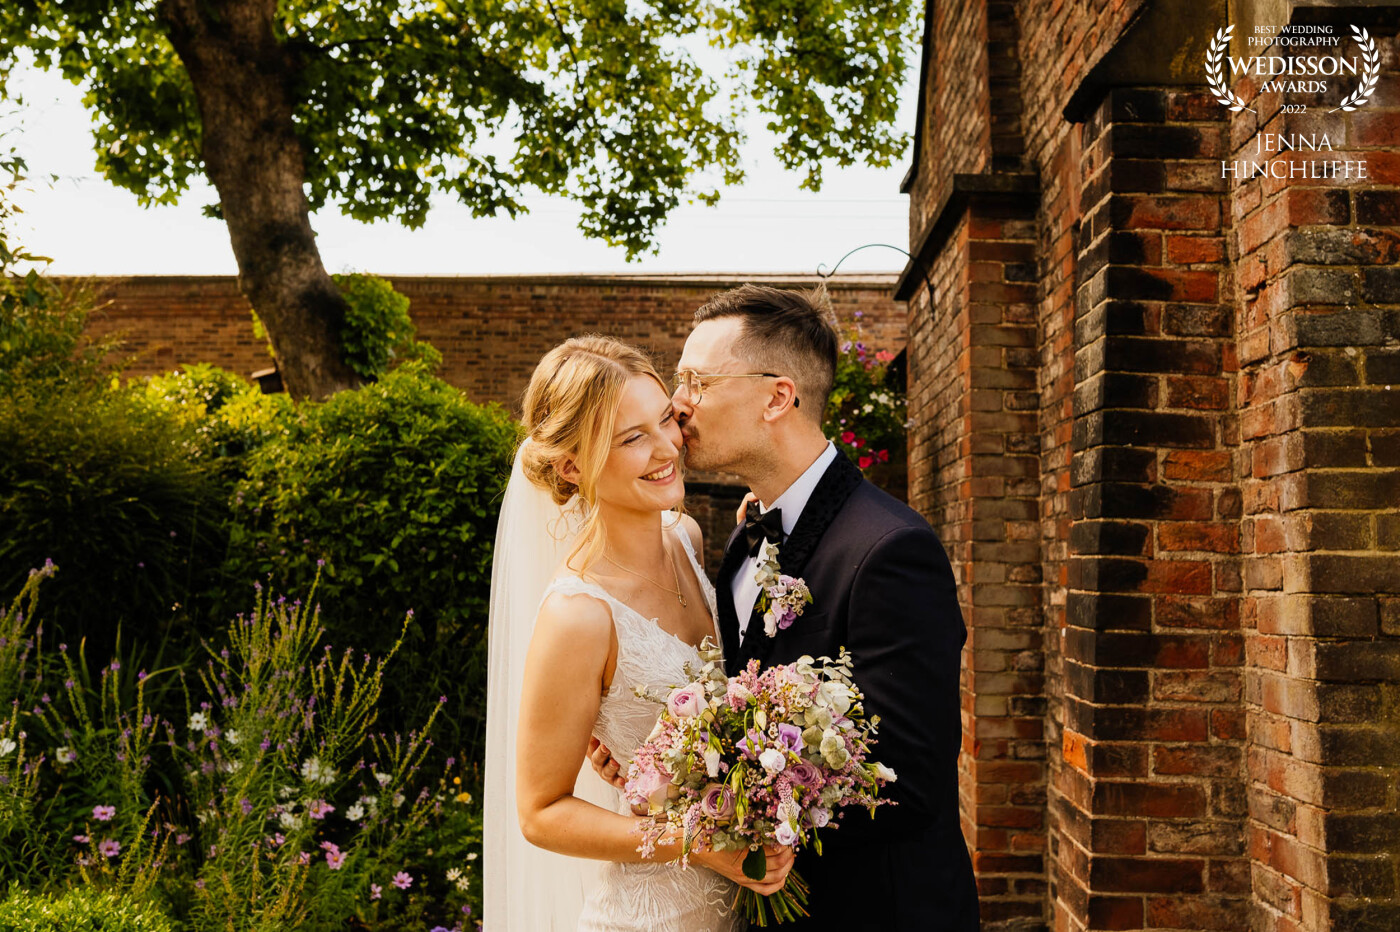 A quick moment in the garden at Middleton's Hotel in York for my couple. They were so laidback, I absolutely loved this wedding!